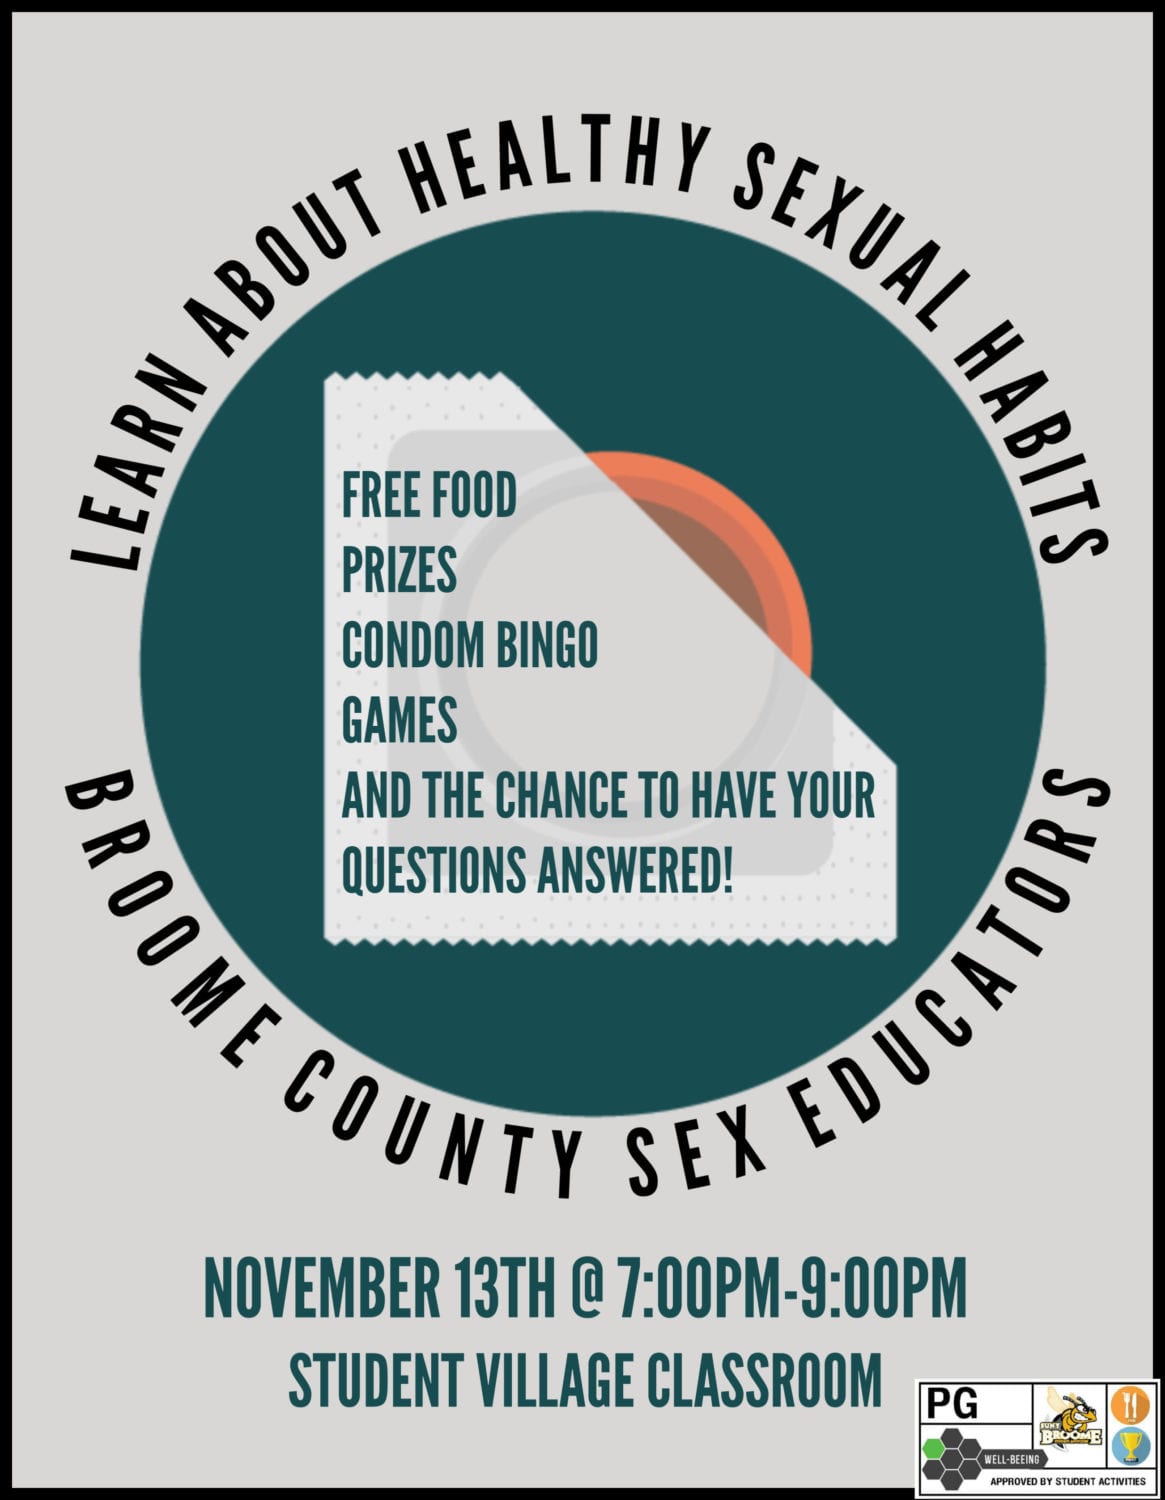 Learn about healthy sexual habits on Nov. 13